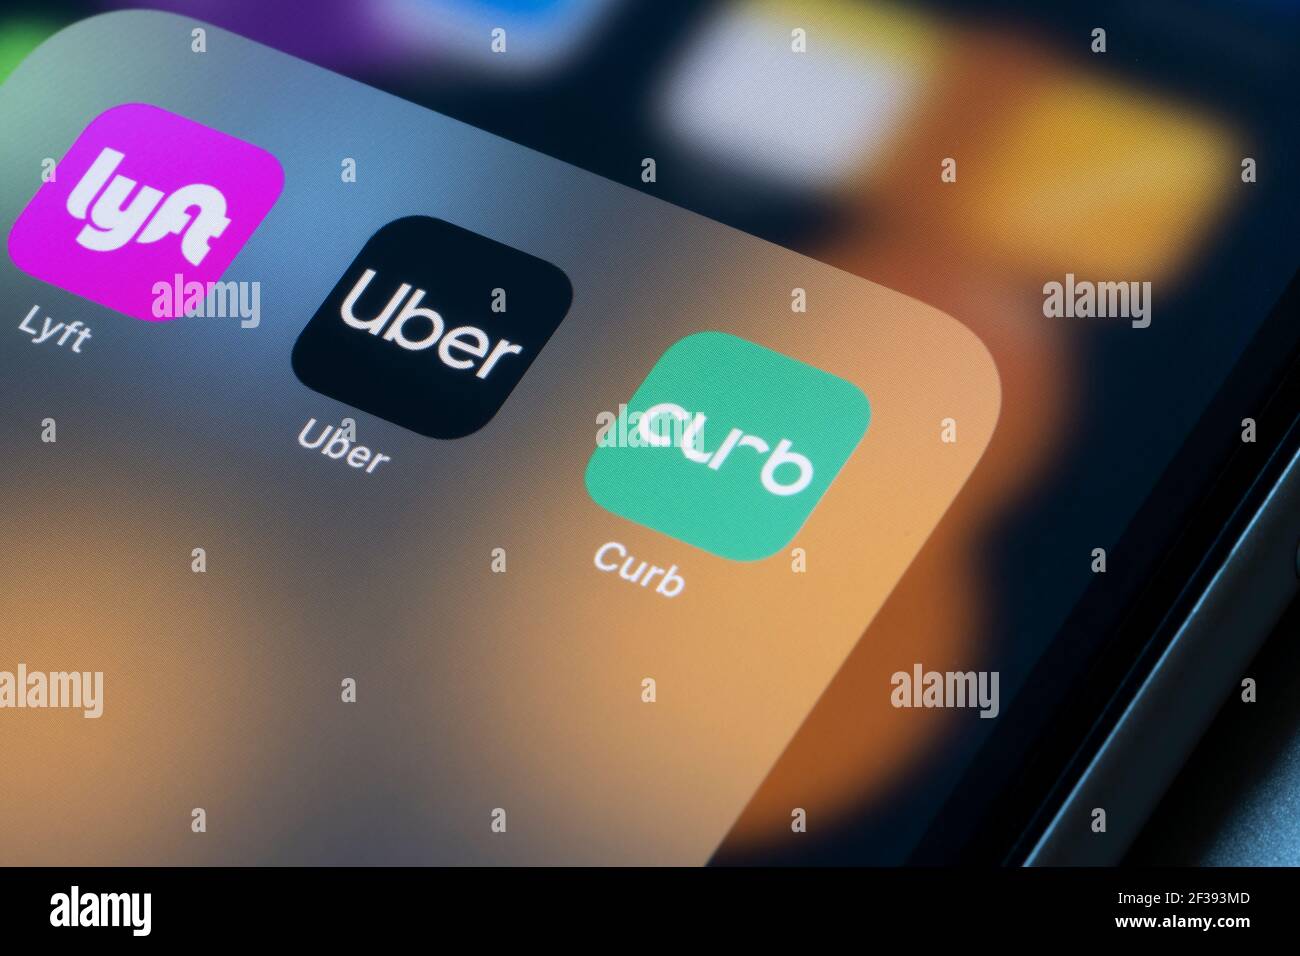 Uber, and Curb ridesharing app icons are seen on an iPhone. Stock Photo